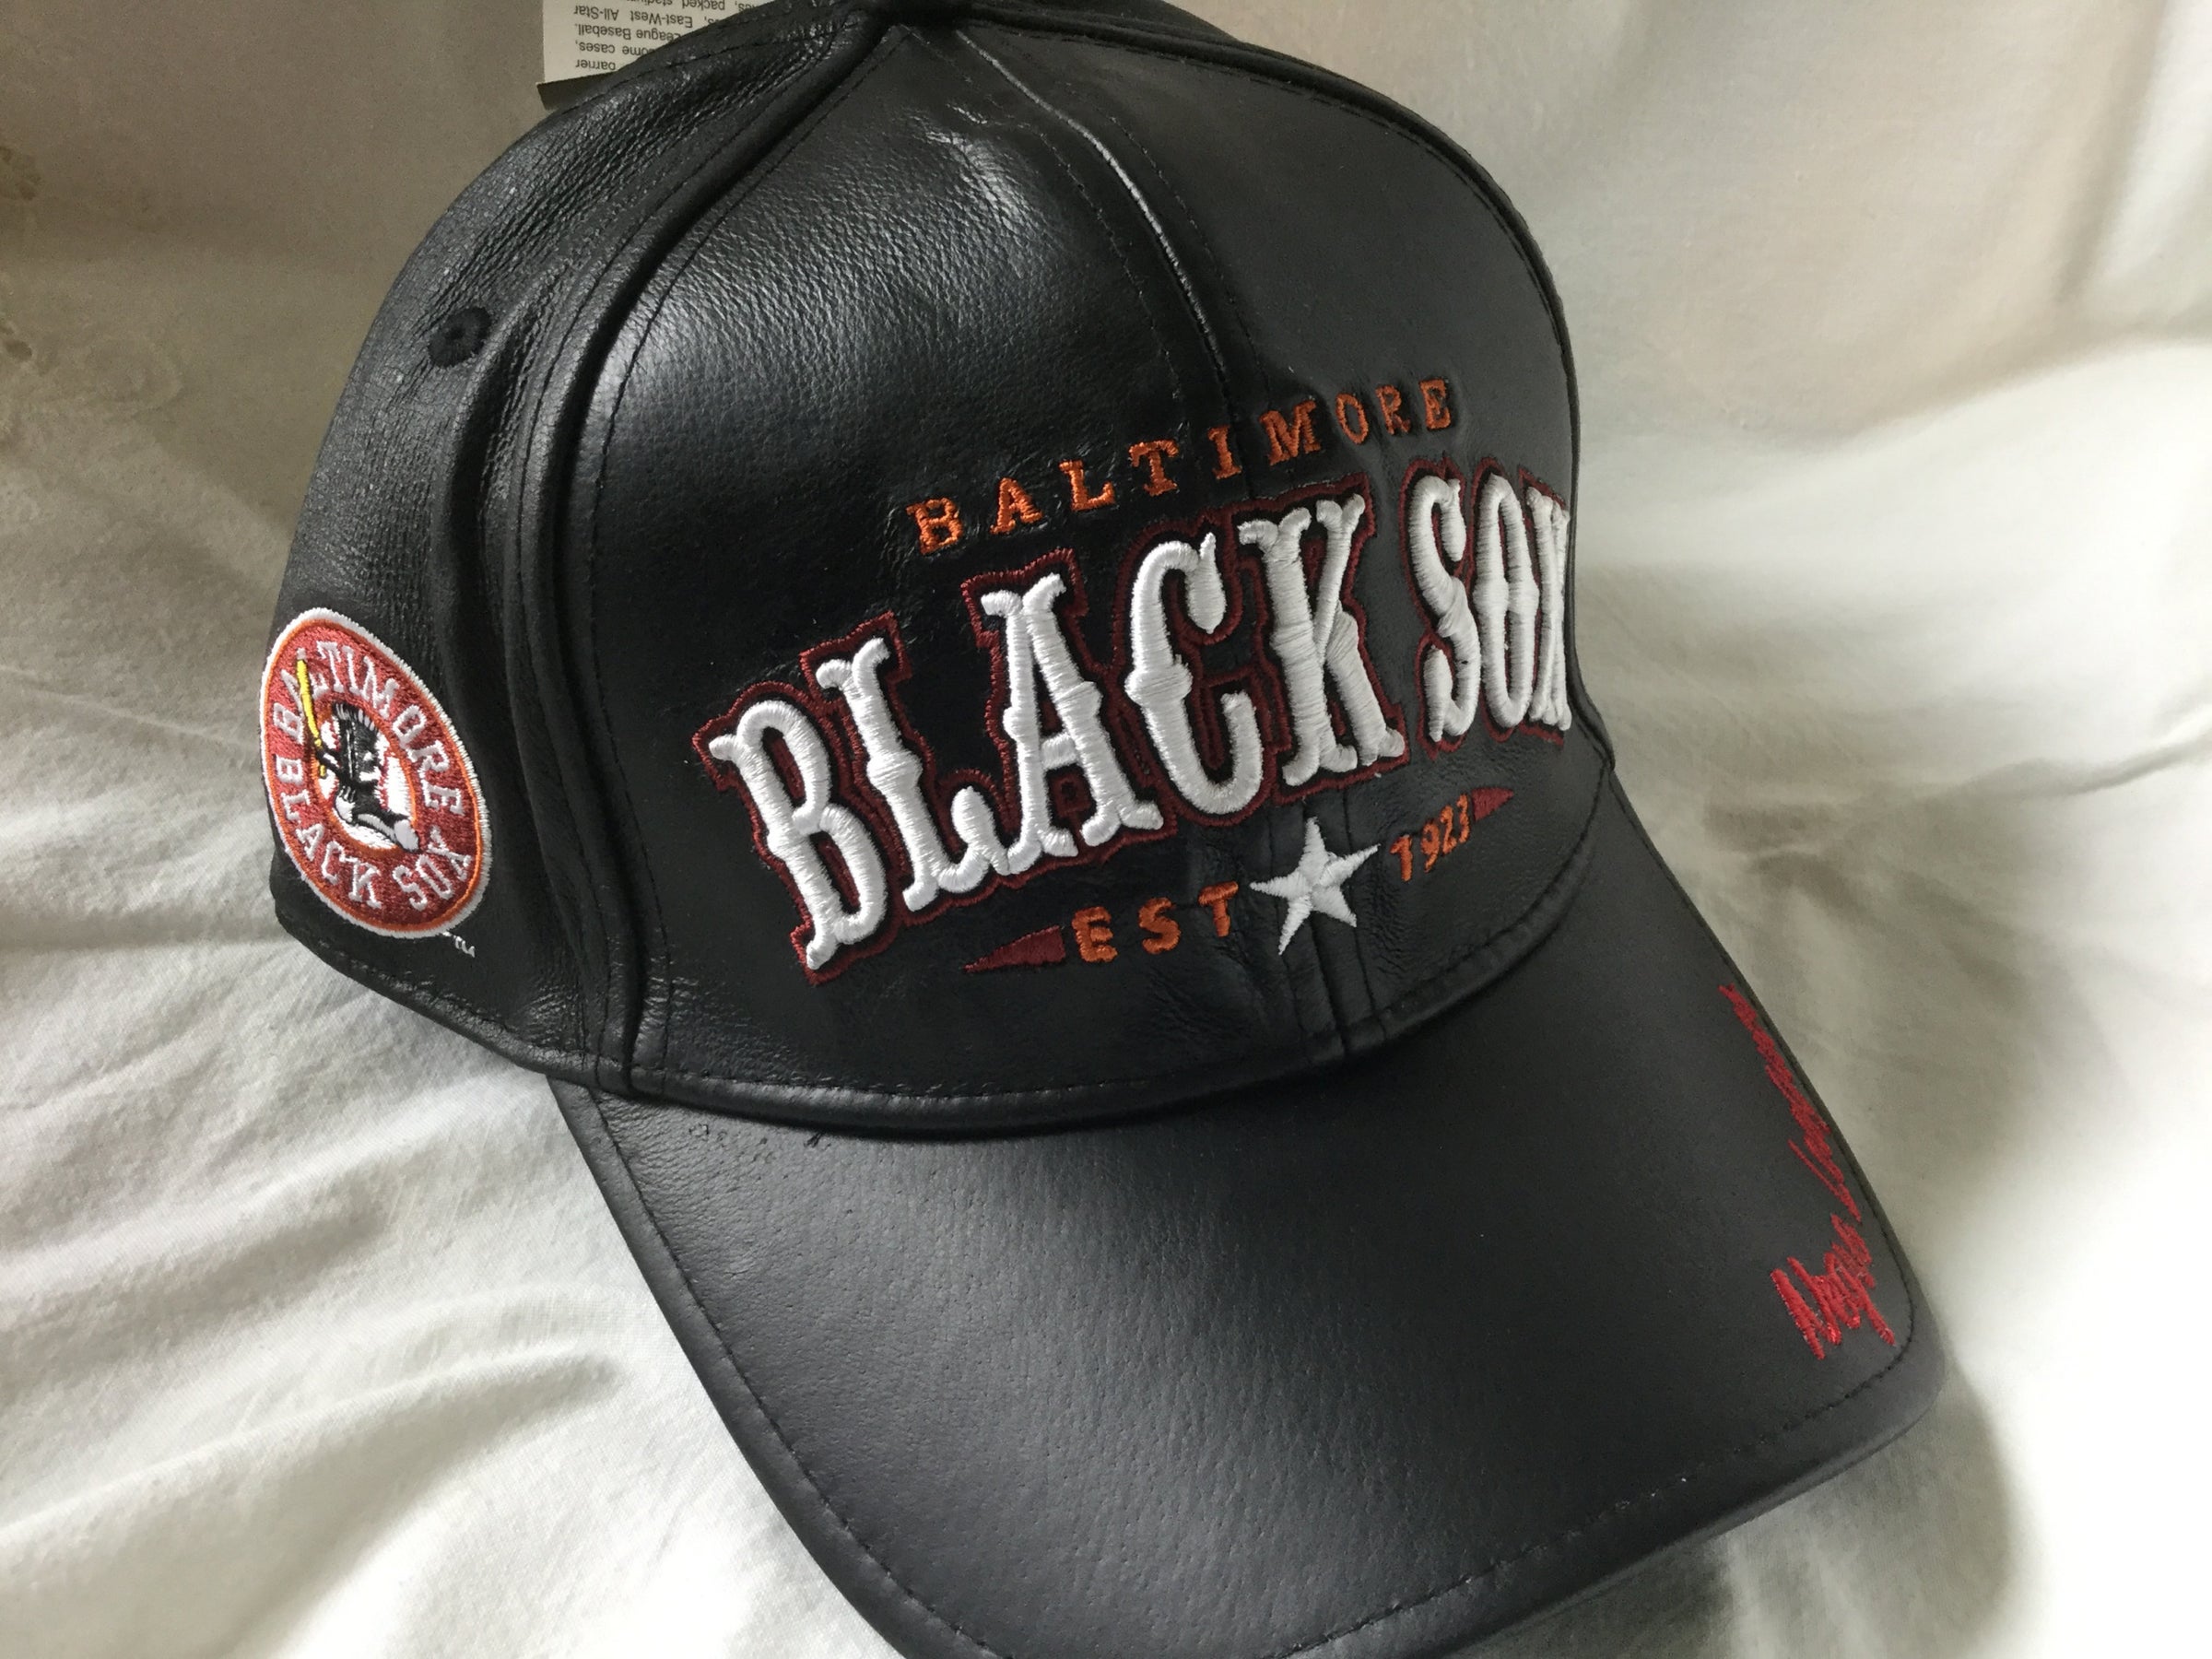 Baltimore Black Sox Leather Cap  B.L.A.C.K (Negro League, Buffalo Soldiers  and Tuskegee Airmen apparel)